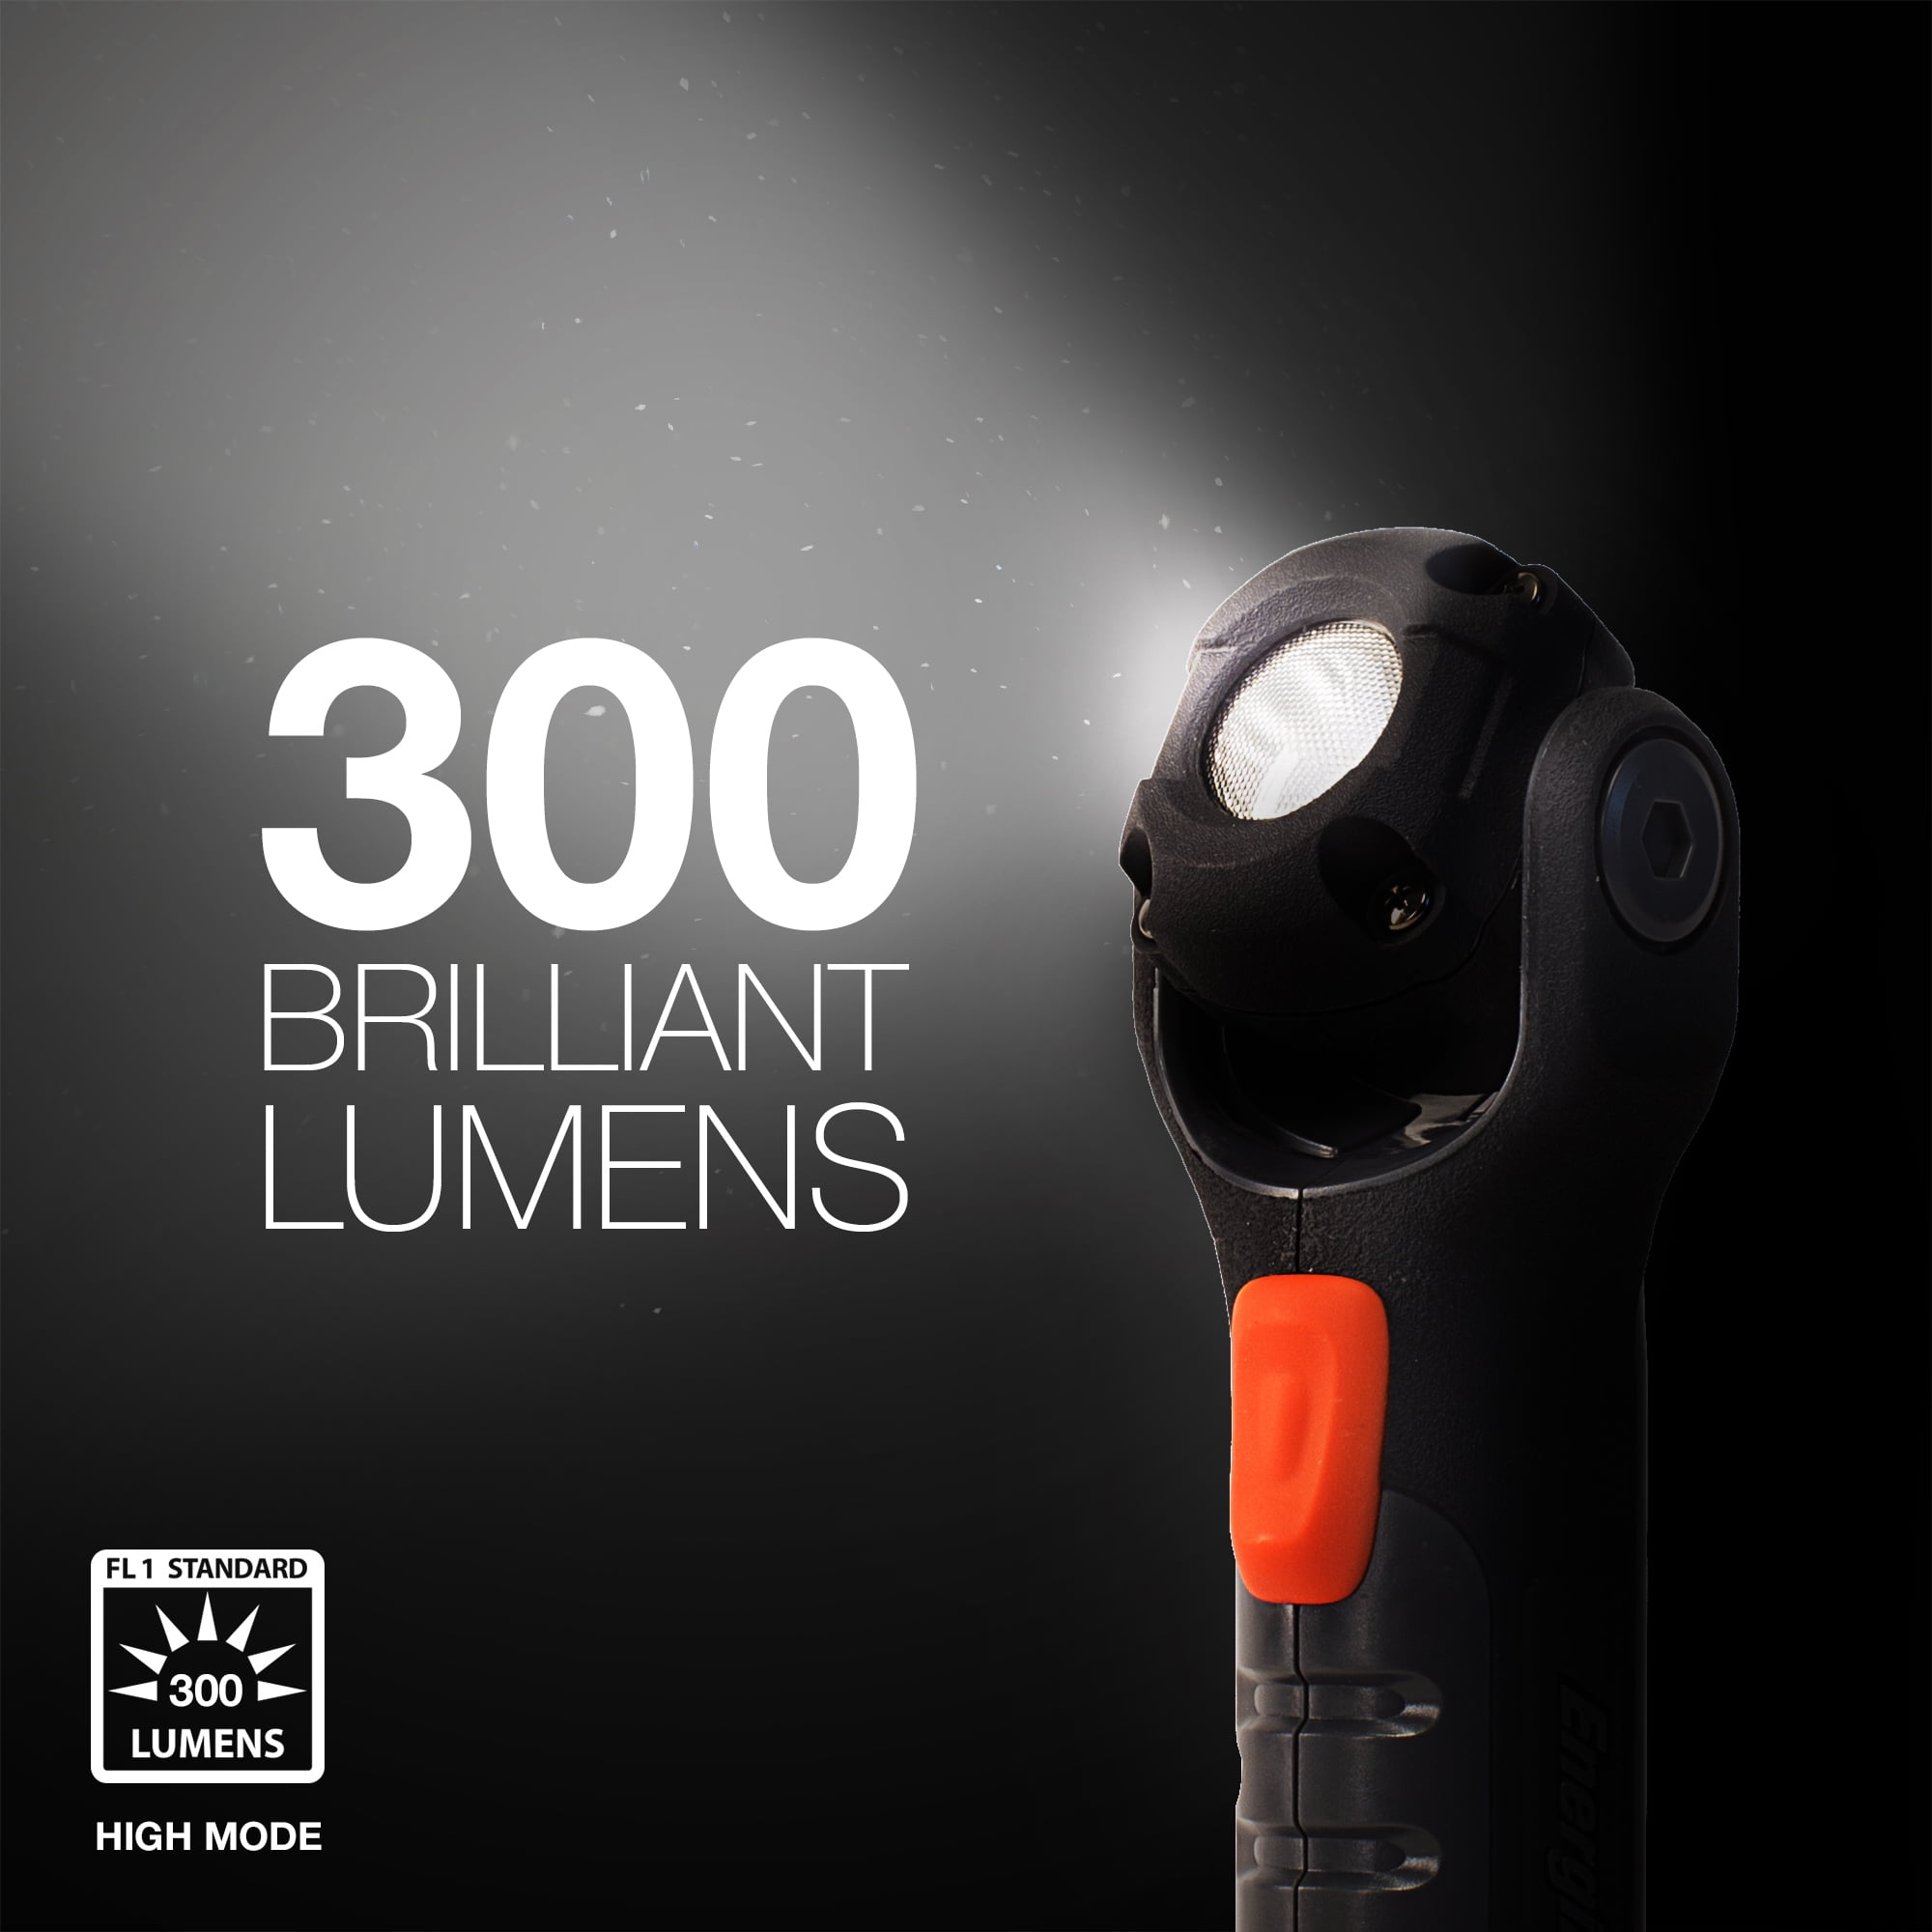 Light, Included) 5 PivotPlus Time, Light, Work (Batteries Energizer Hour Professional AA Lumens 300 Case Run LED Hard